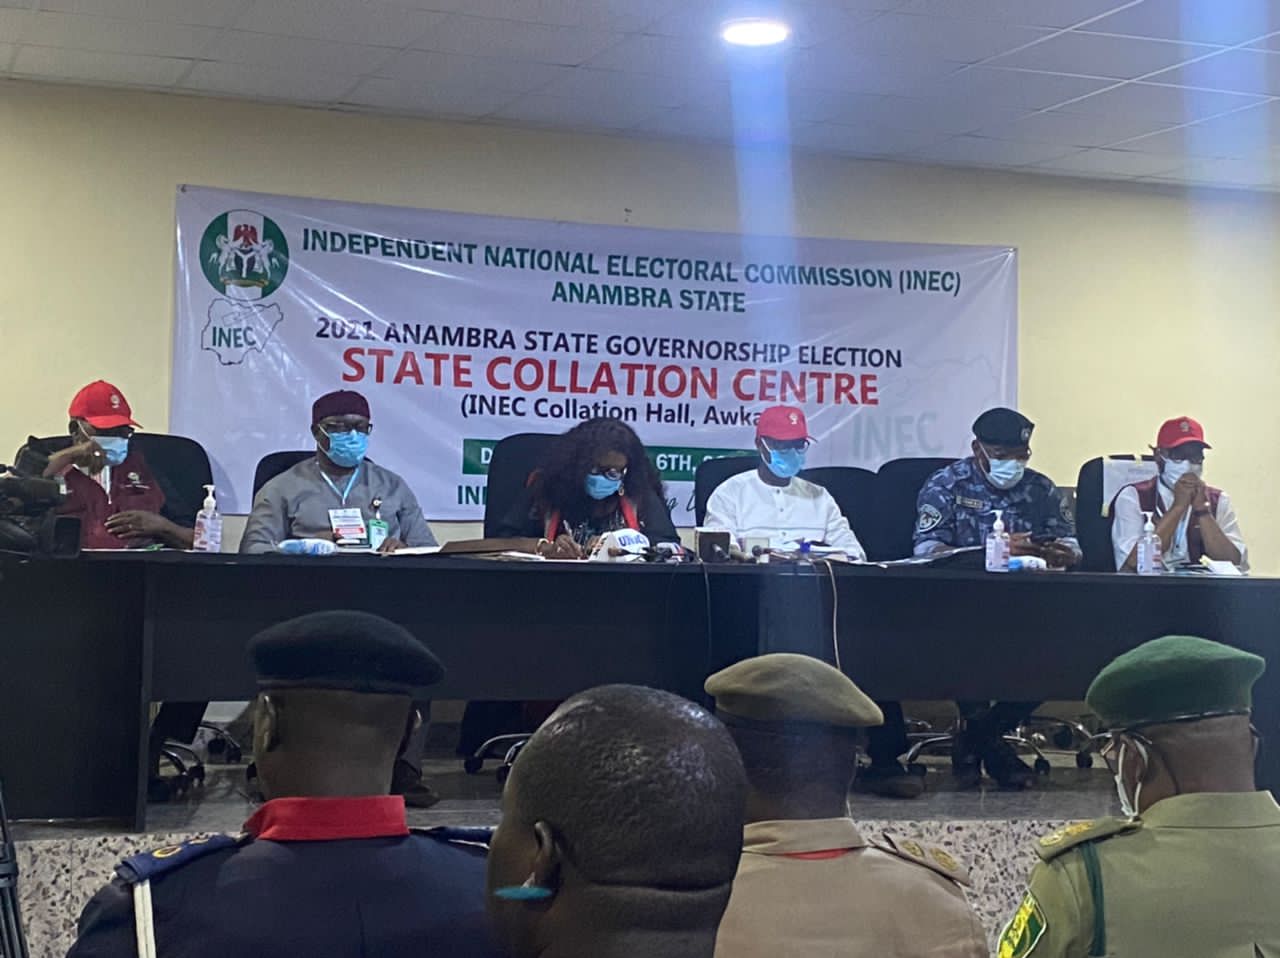 Anambra Election: INEC Postpones Final Collation Of Election Results By One Hour